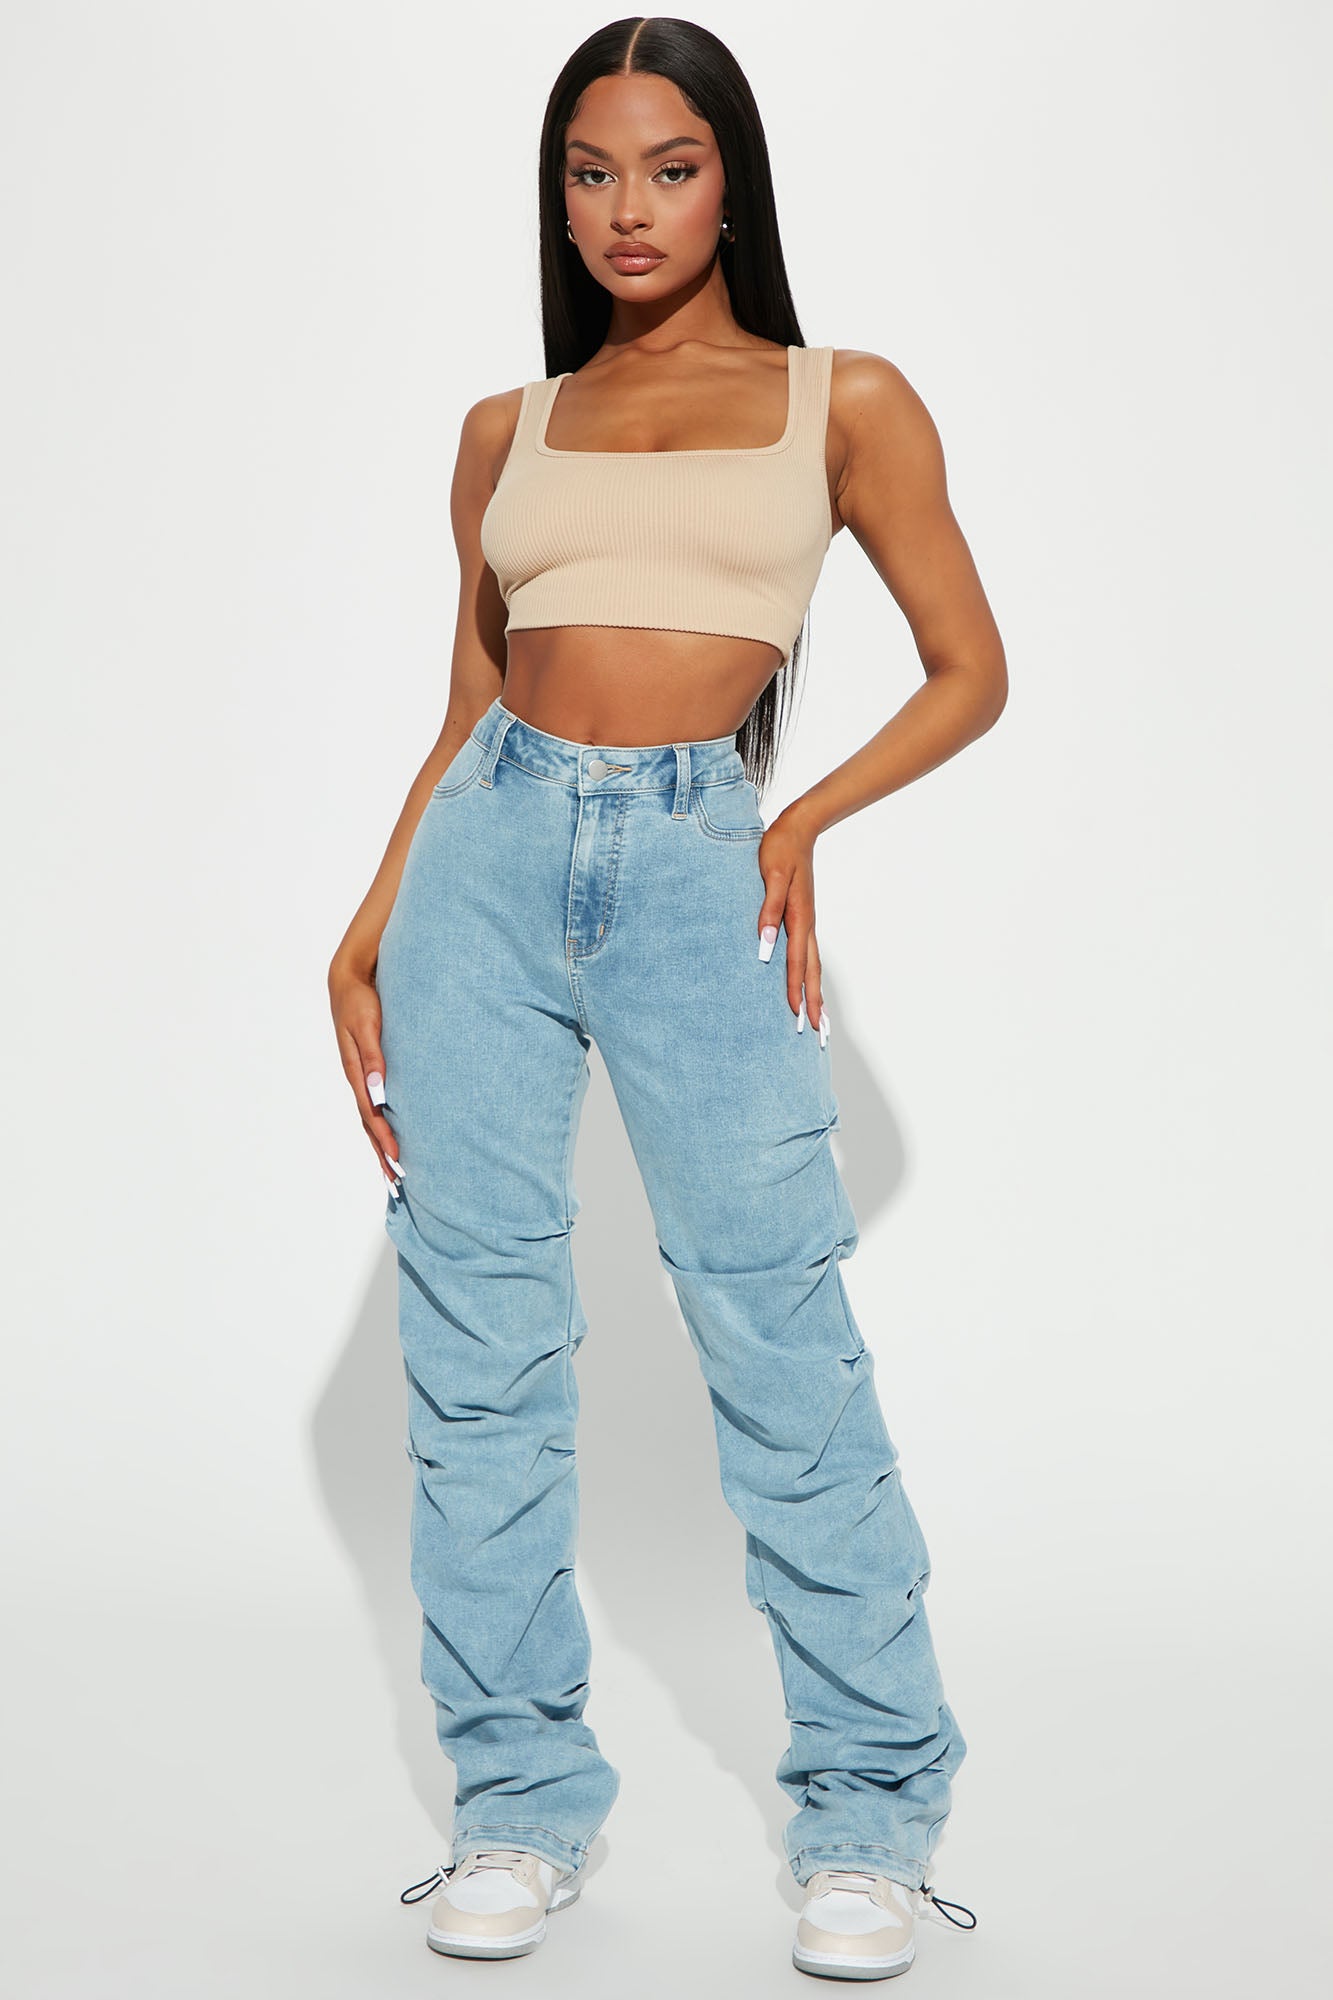 Catch My Vibe Stacked Straight Leg Jeans - Light Blue Wash